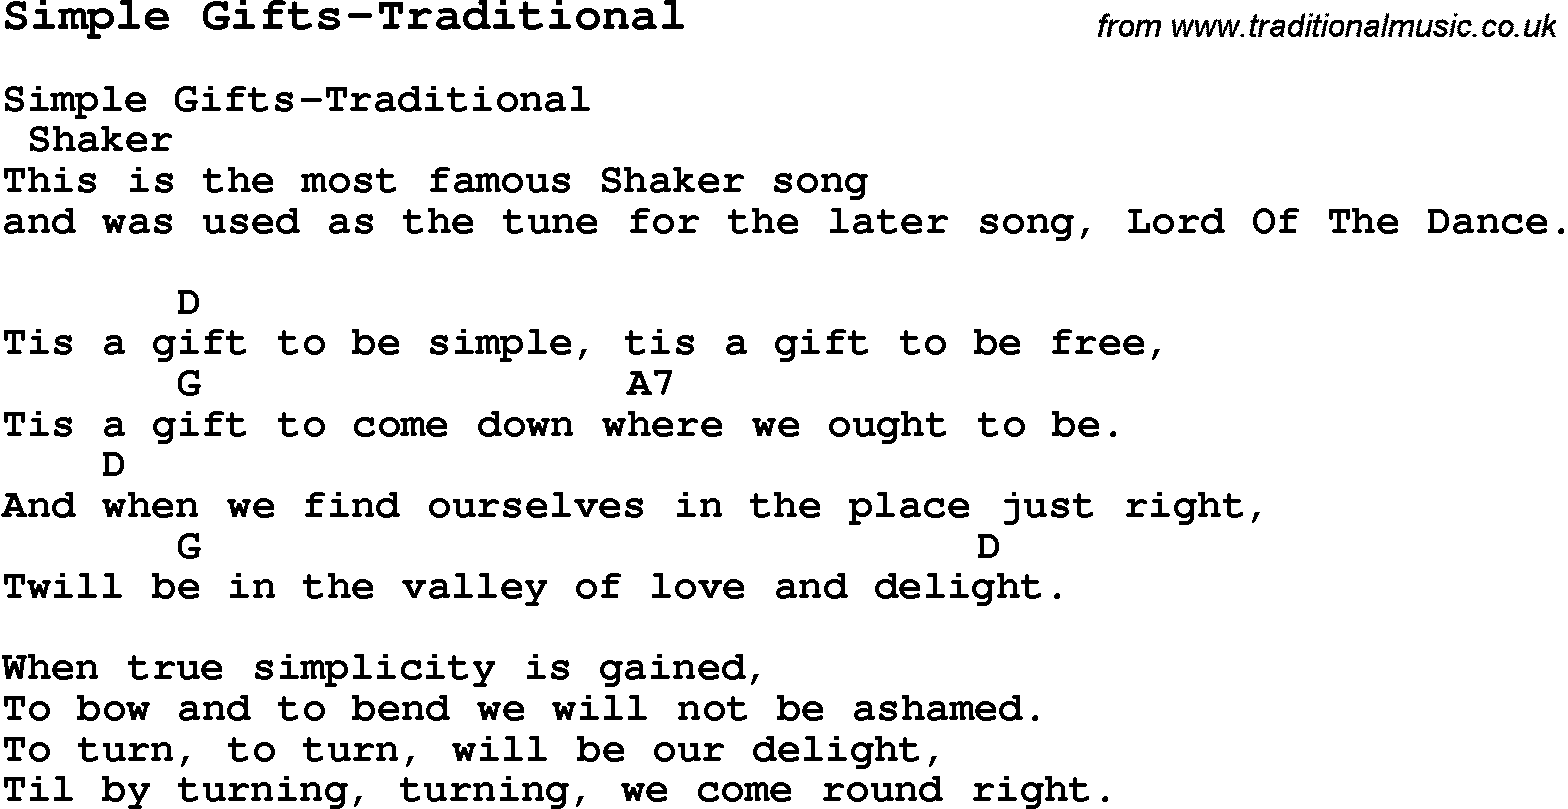 Summer-Camp Song, Simple Gifts-Traditional, with lyrics and chords for Ukulele, Guitar Banjo etc.